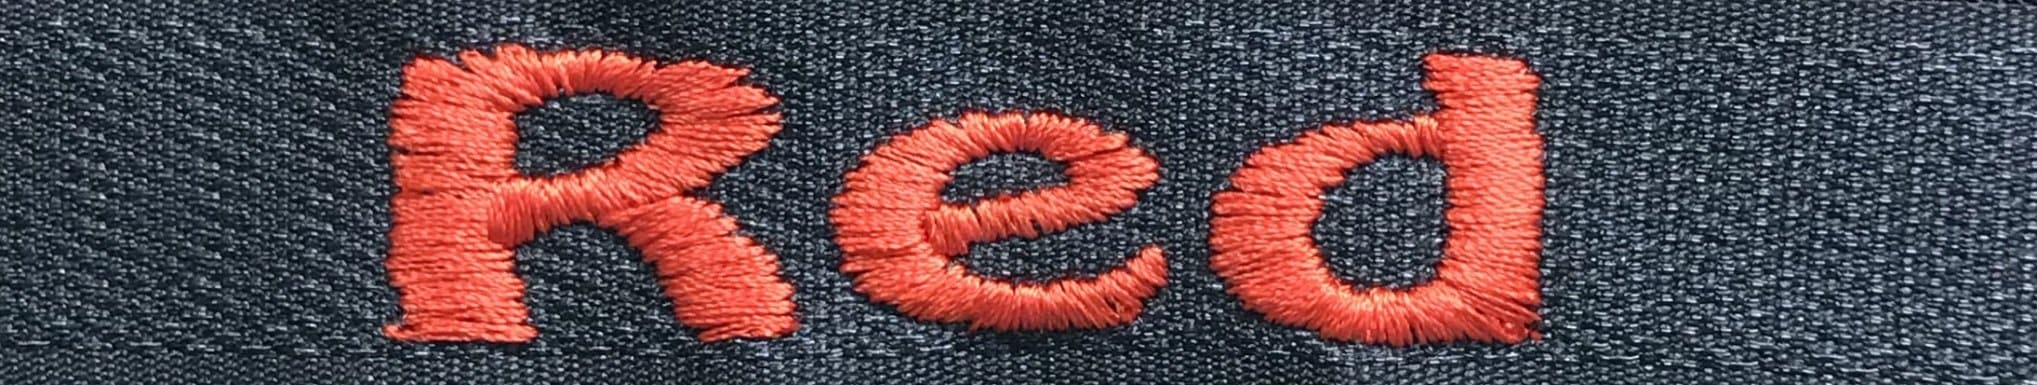 example of embroidery in red